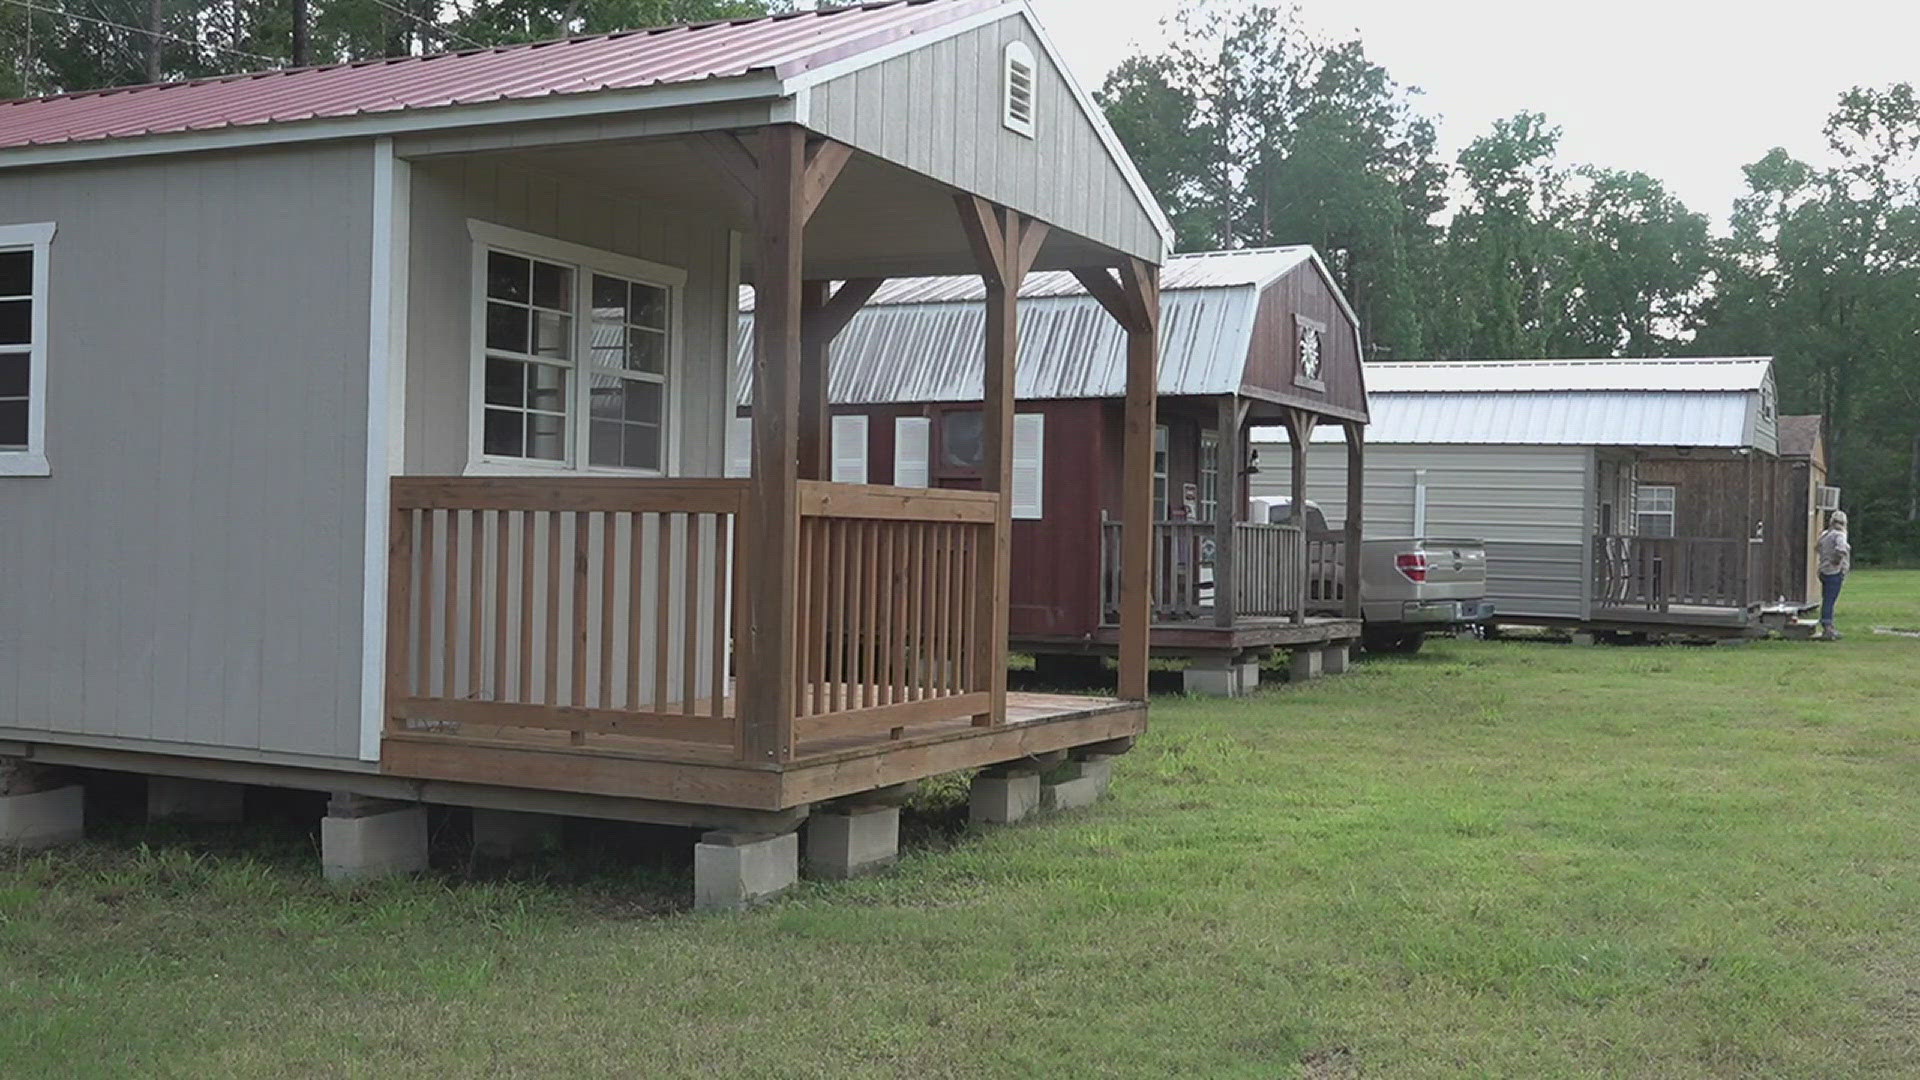 The Rural Homeless Network provided a tiny home for a veteran who was displaced because of flooding and they plan on building more.